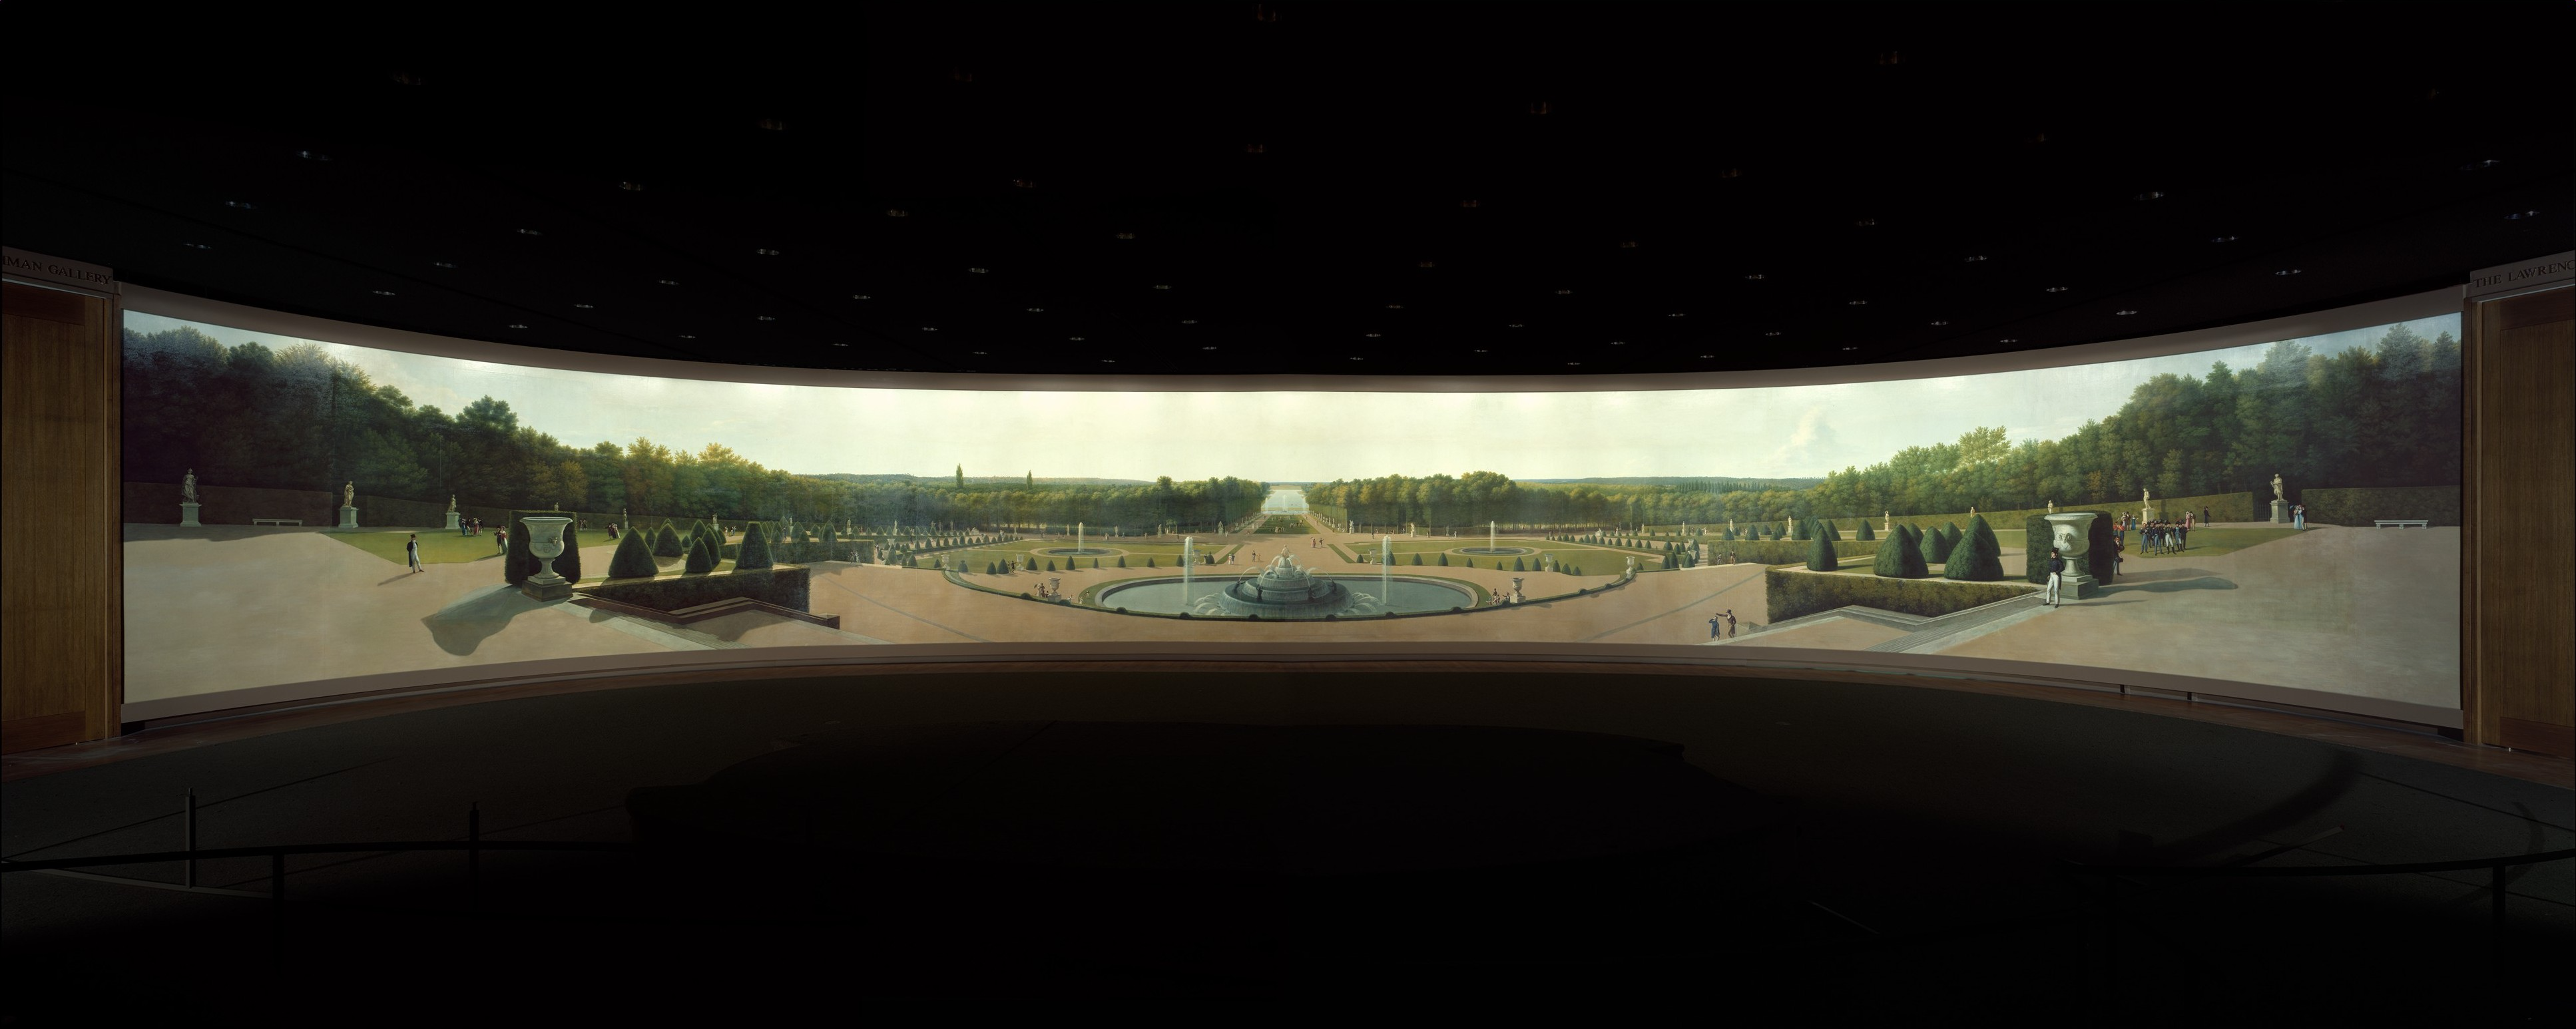 John Vanderlyn, Panoramic View of The Palace and Gardens of Versailles, oil on canvas, 1818-19 (Metropolitan Museum of Art, New York). Photo: Public Domain.